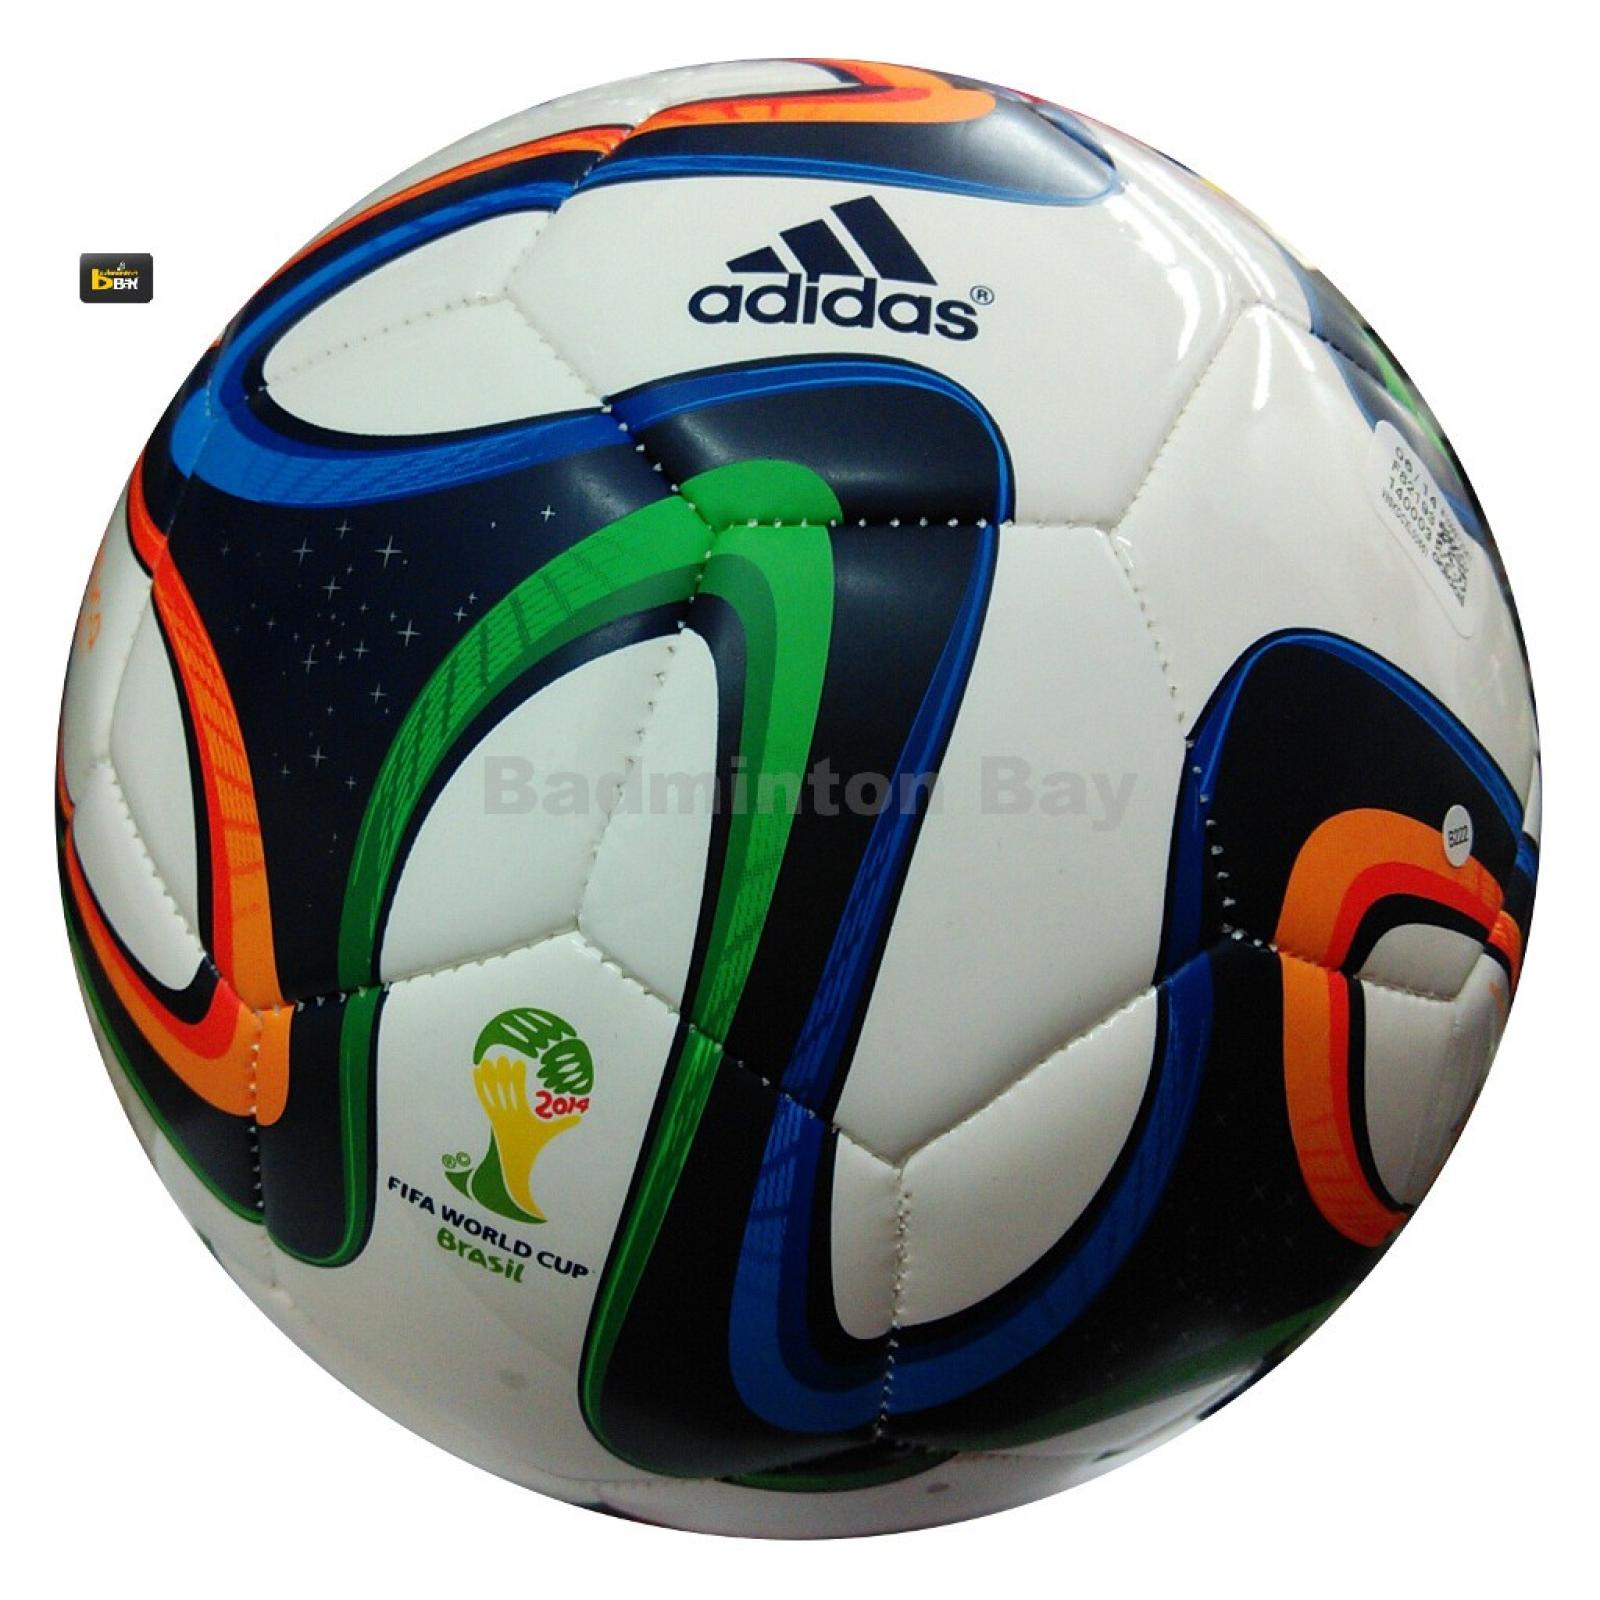 Out of stock Adidas Brazuca 2014 Glider Football Match Ball Replica FIFA  Size 5